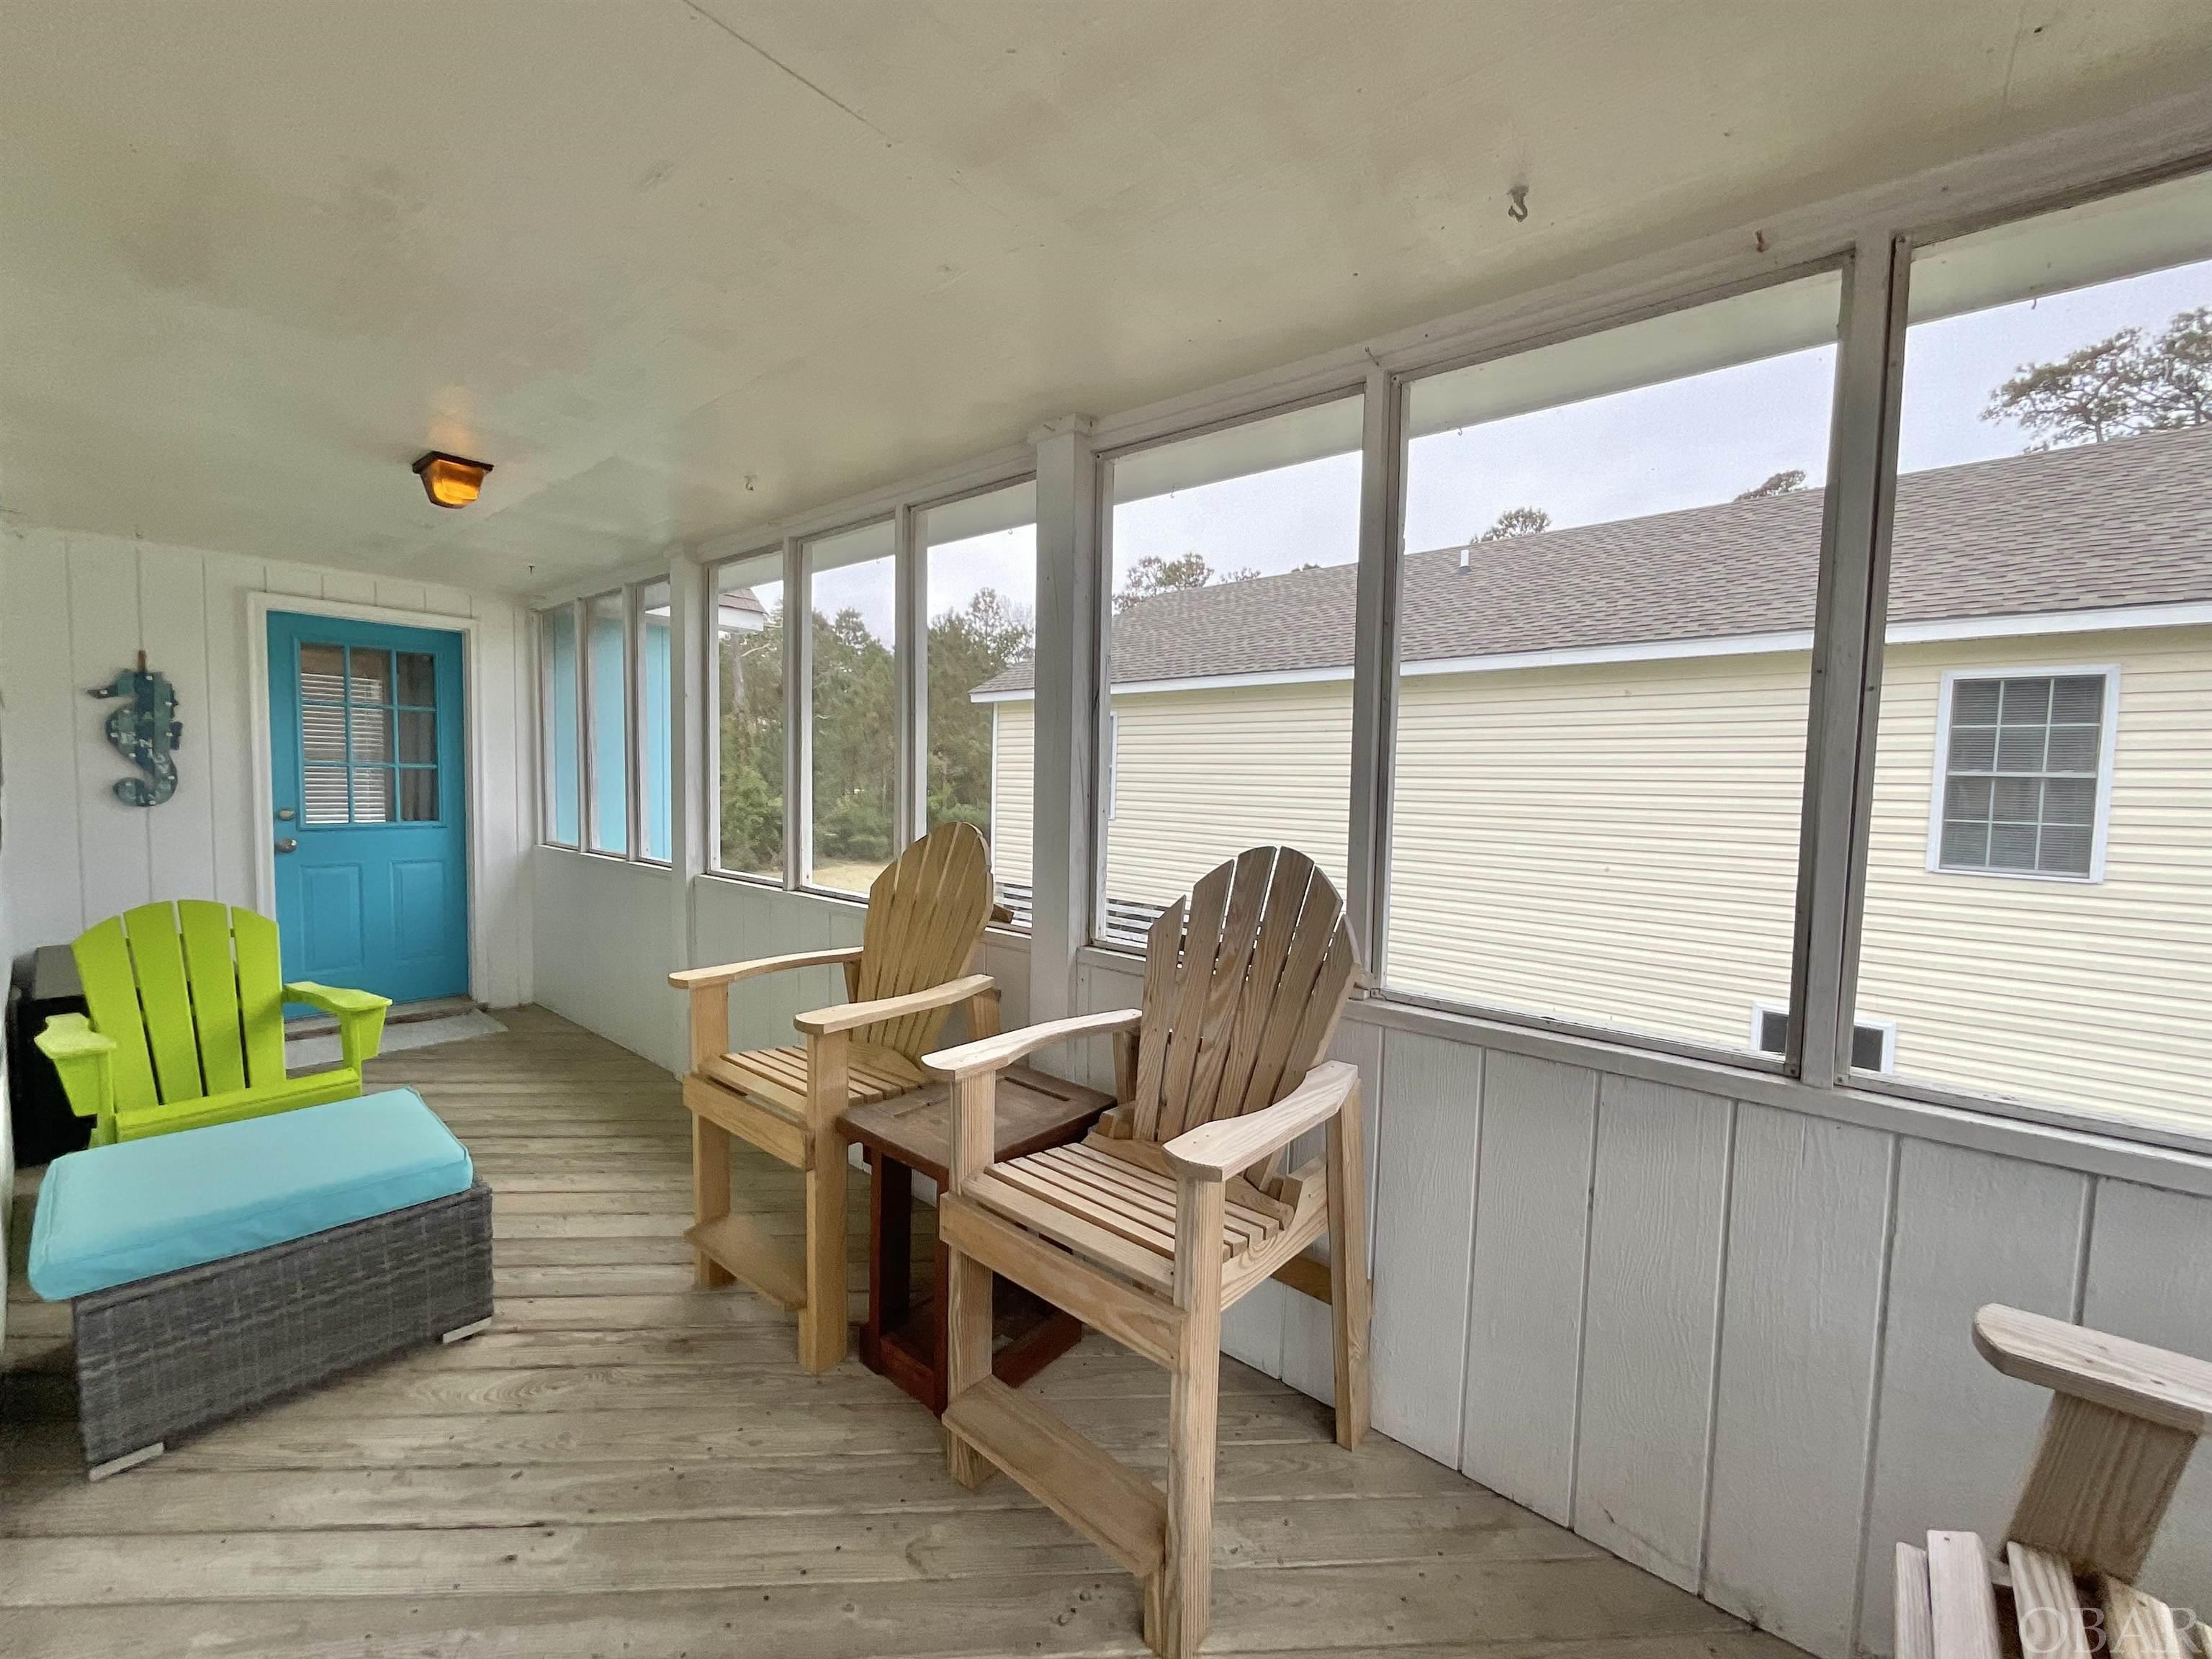 479 Harbour View Drive, Kill Devil Hills, NC 27948, 3 Bedrooms Bedrooms, ,2 BathroomsBathrooms,Residential,For sale,Harbour View Drive,125150